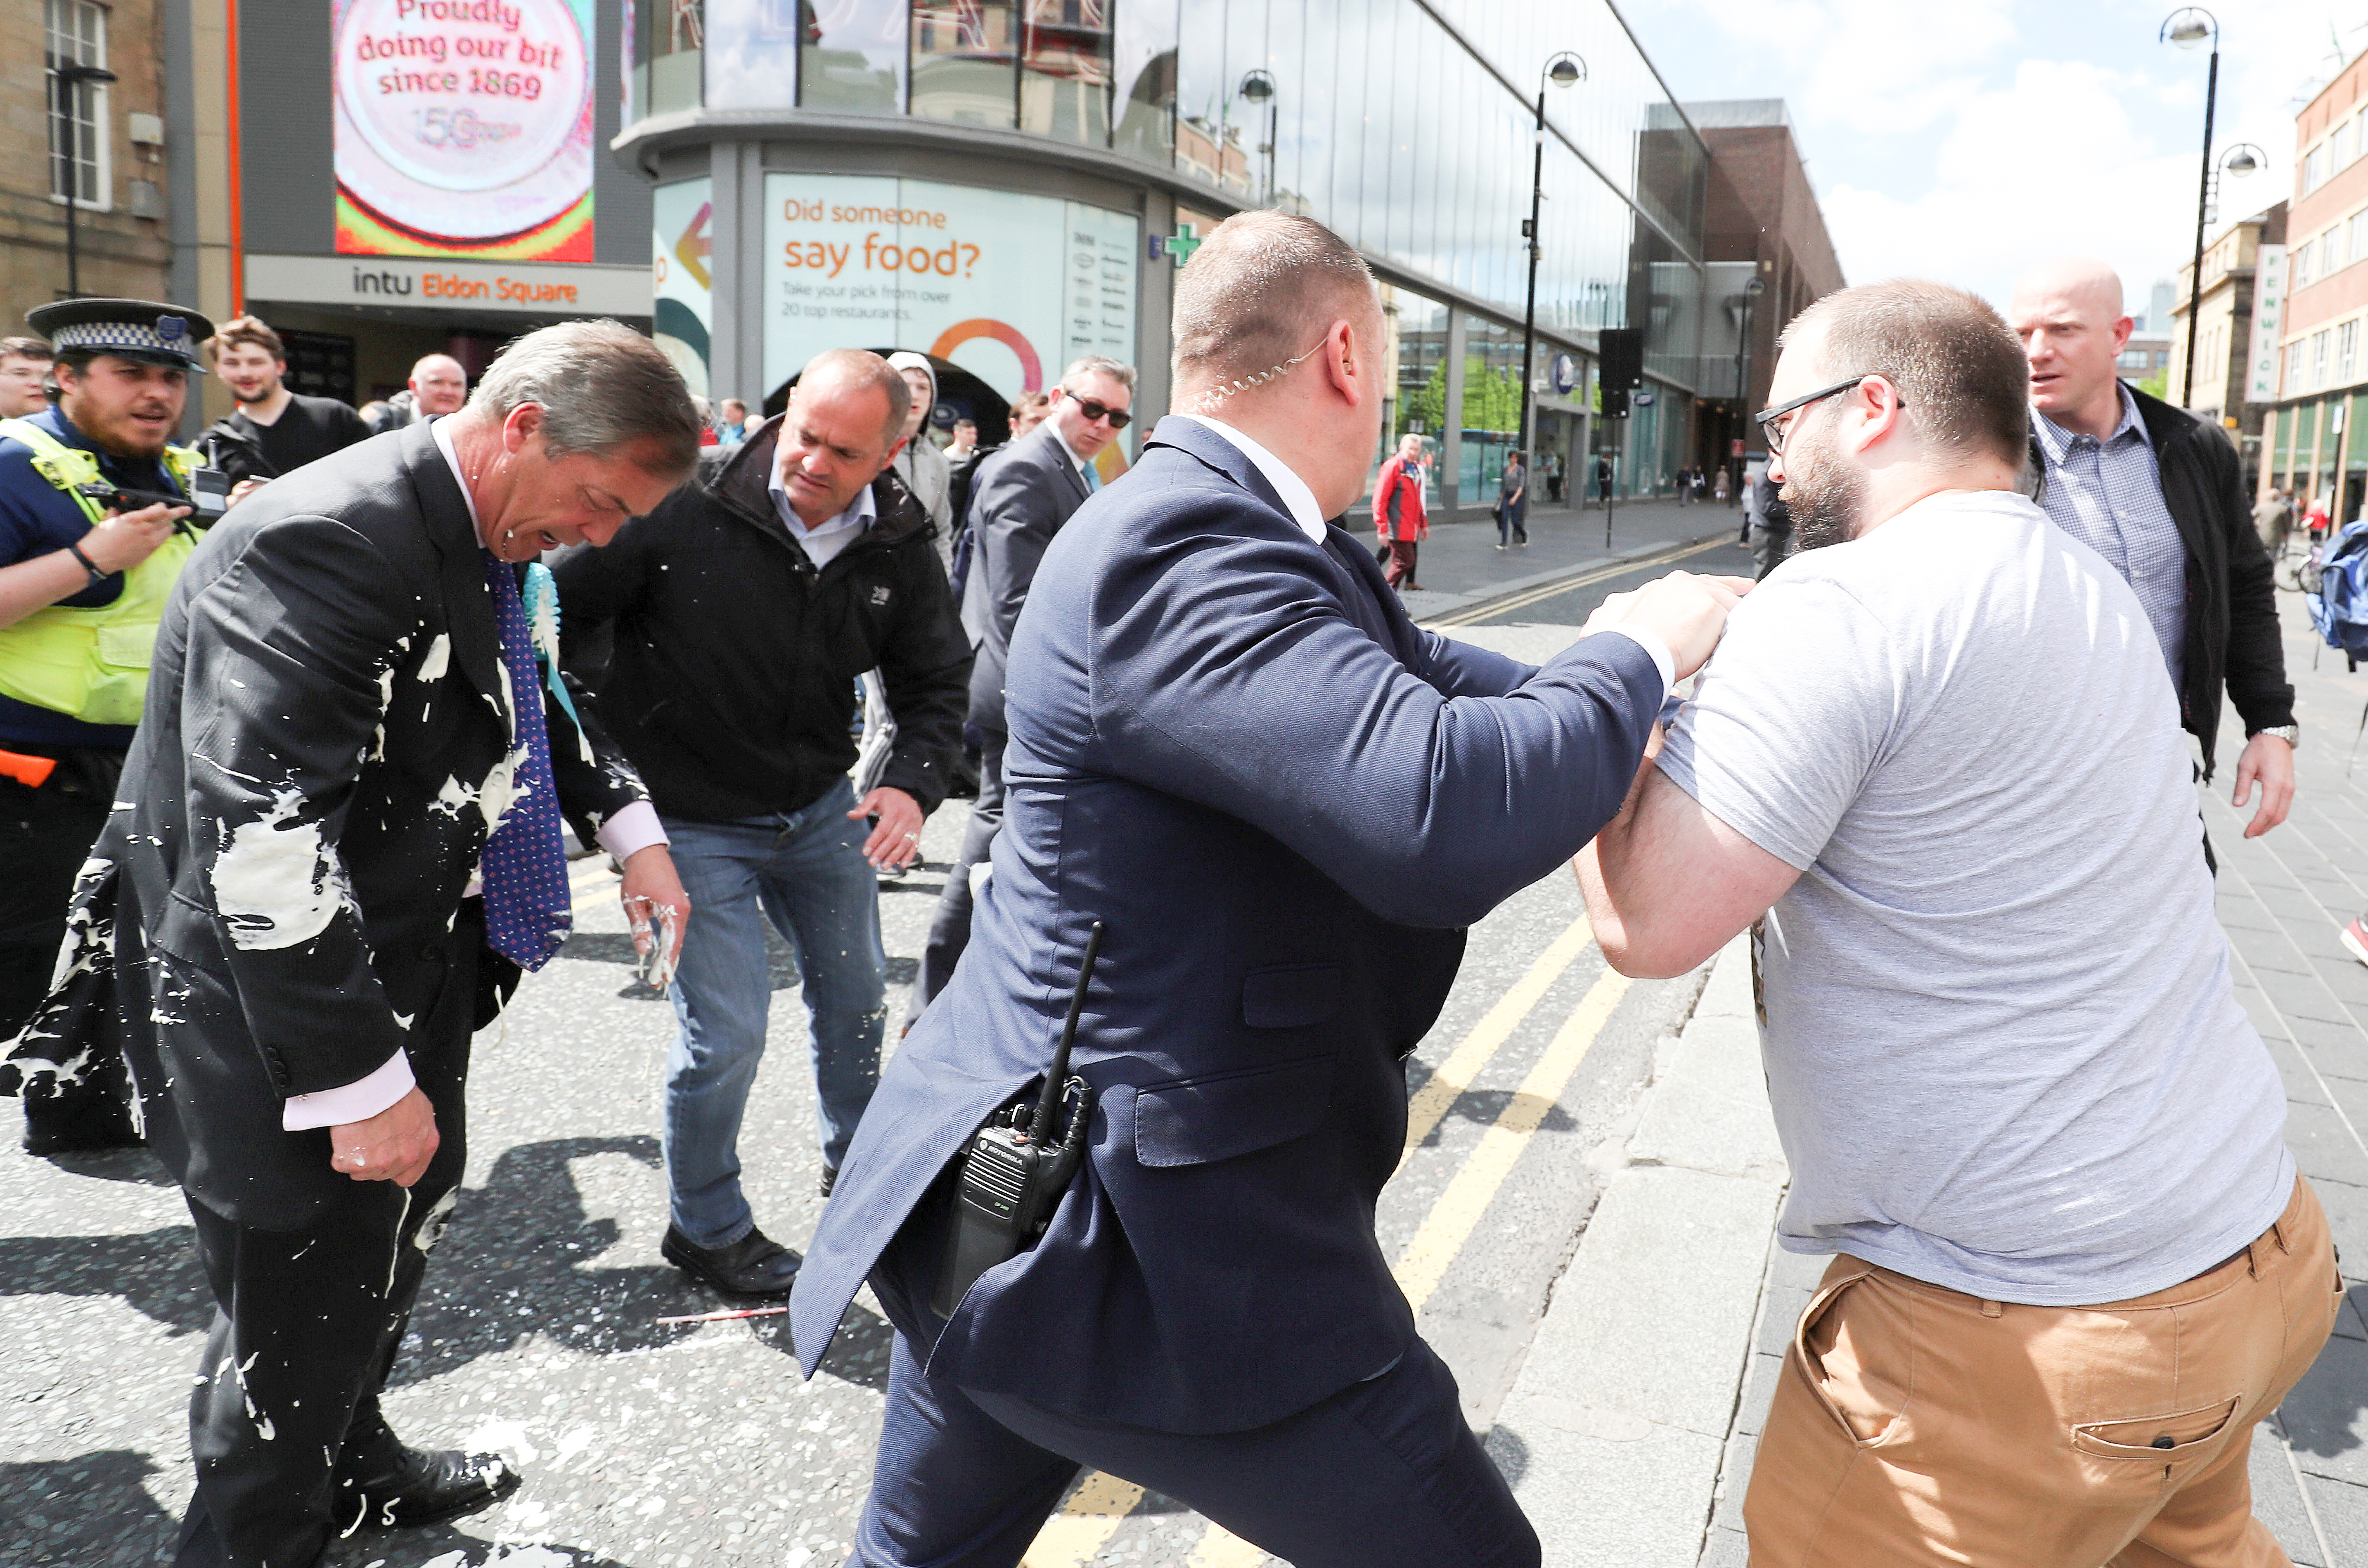 A person trying to attack the British politician